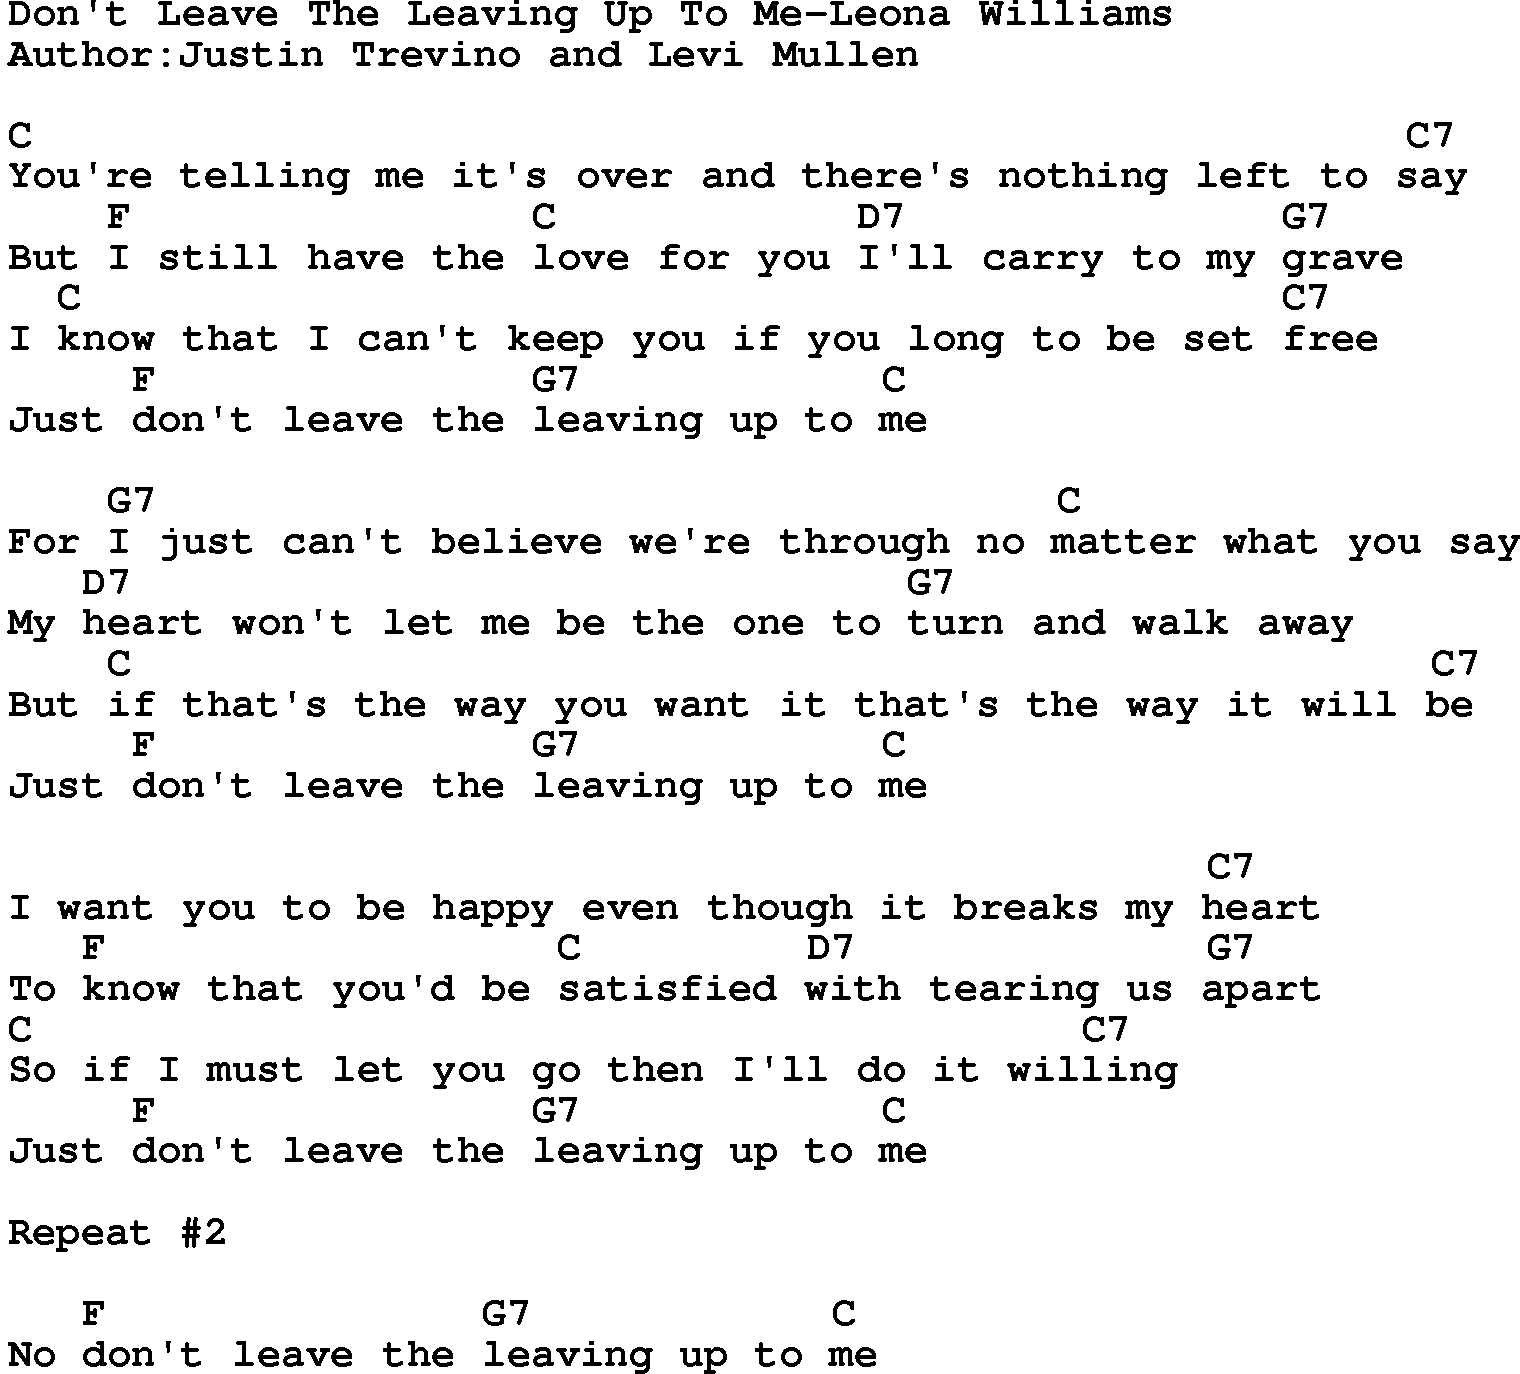 Country music song: Don't Leave The Leaving Up To Me-Leona Williams lyrics and chords